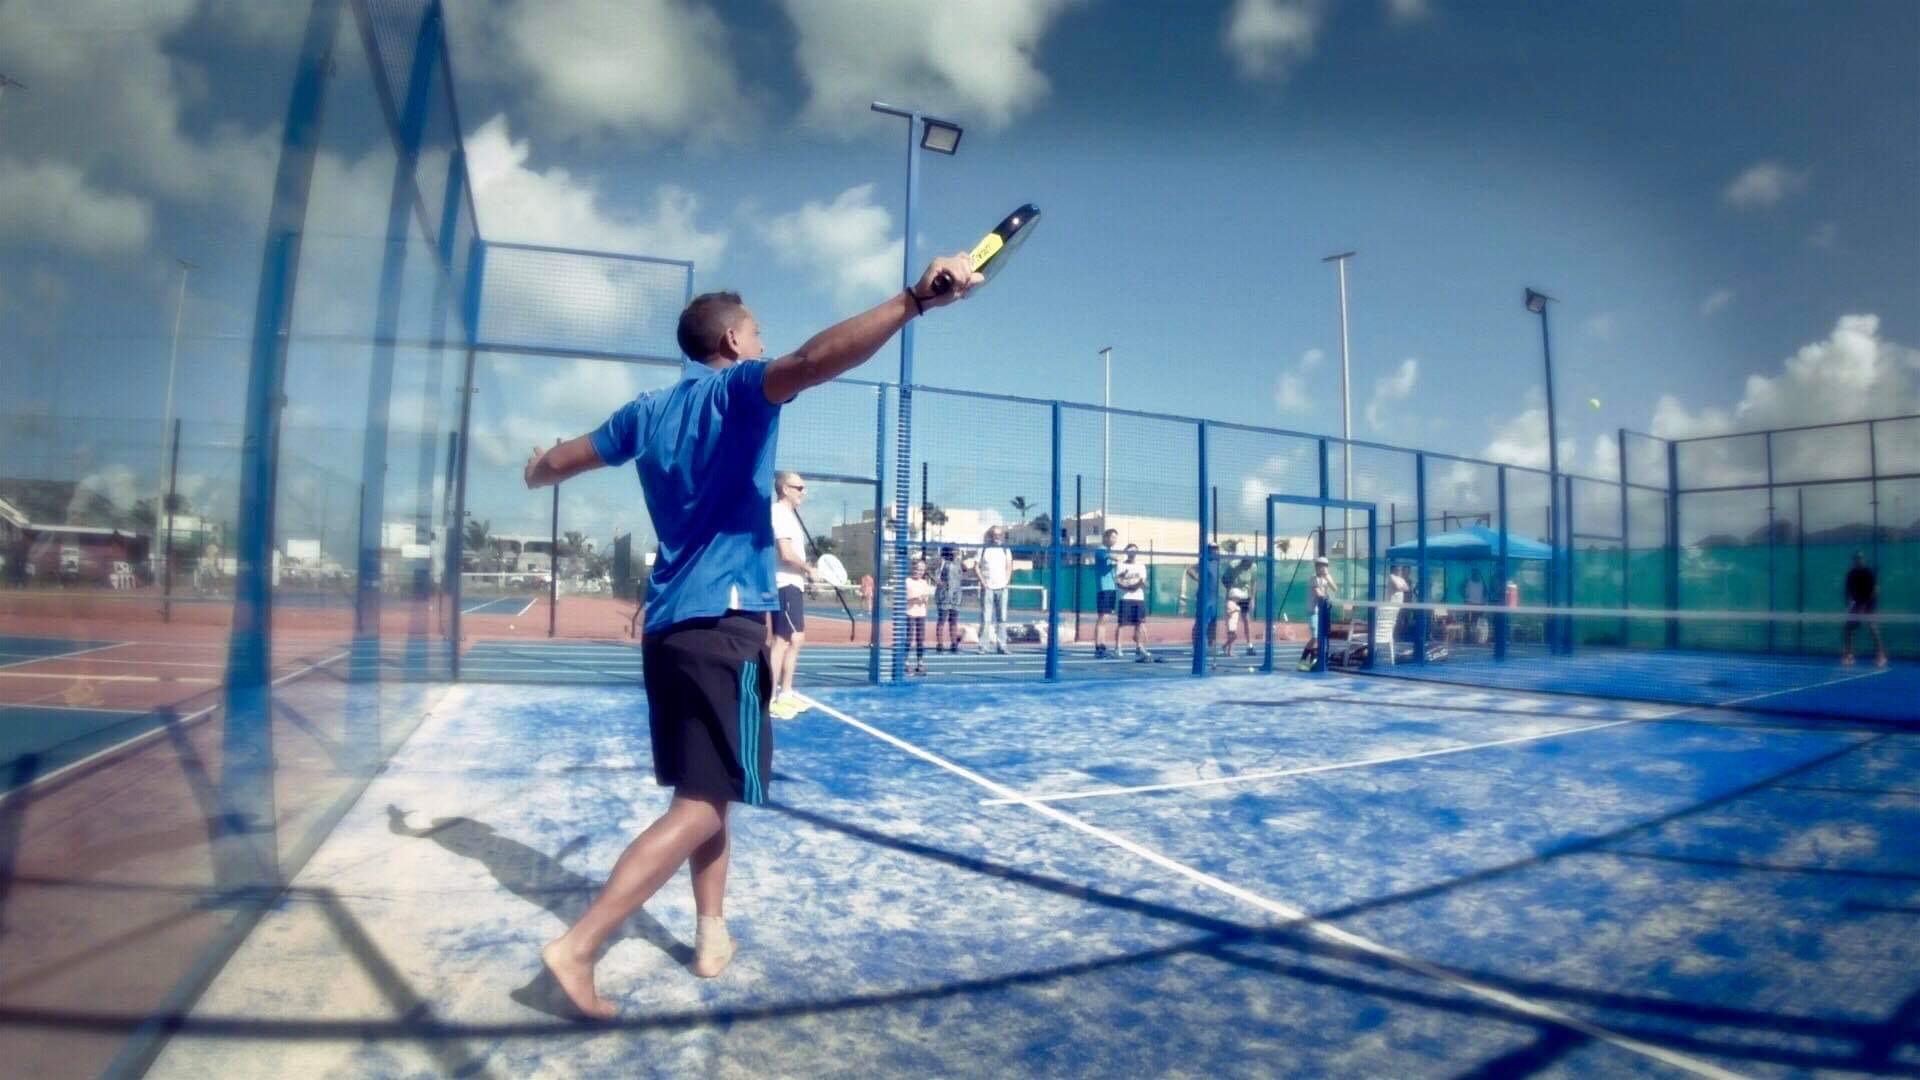 The first club of padel in the West Indies was born!